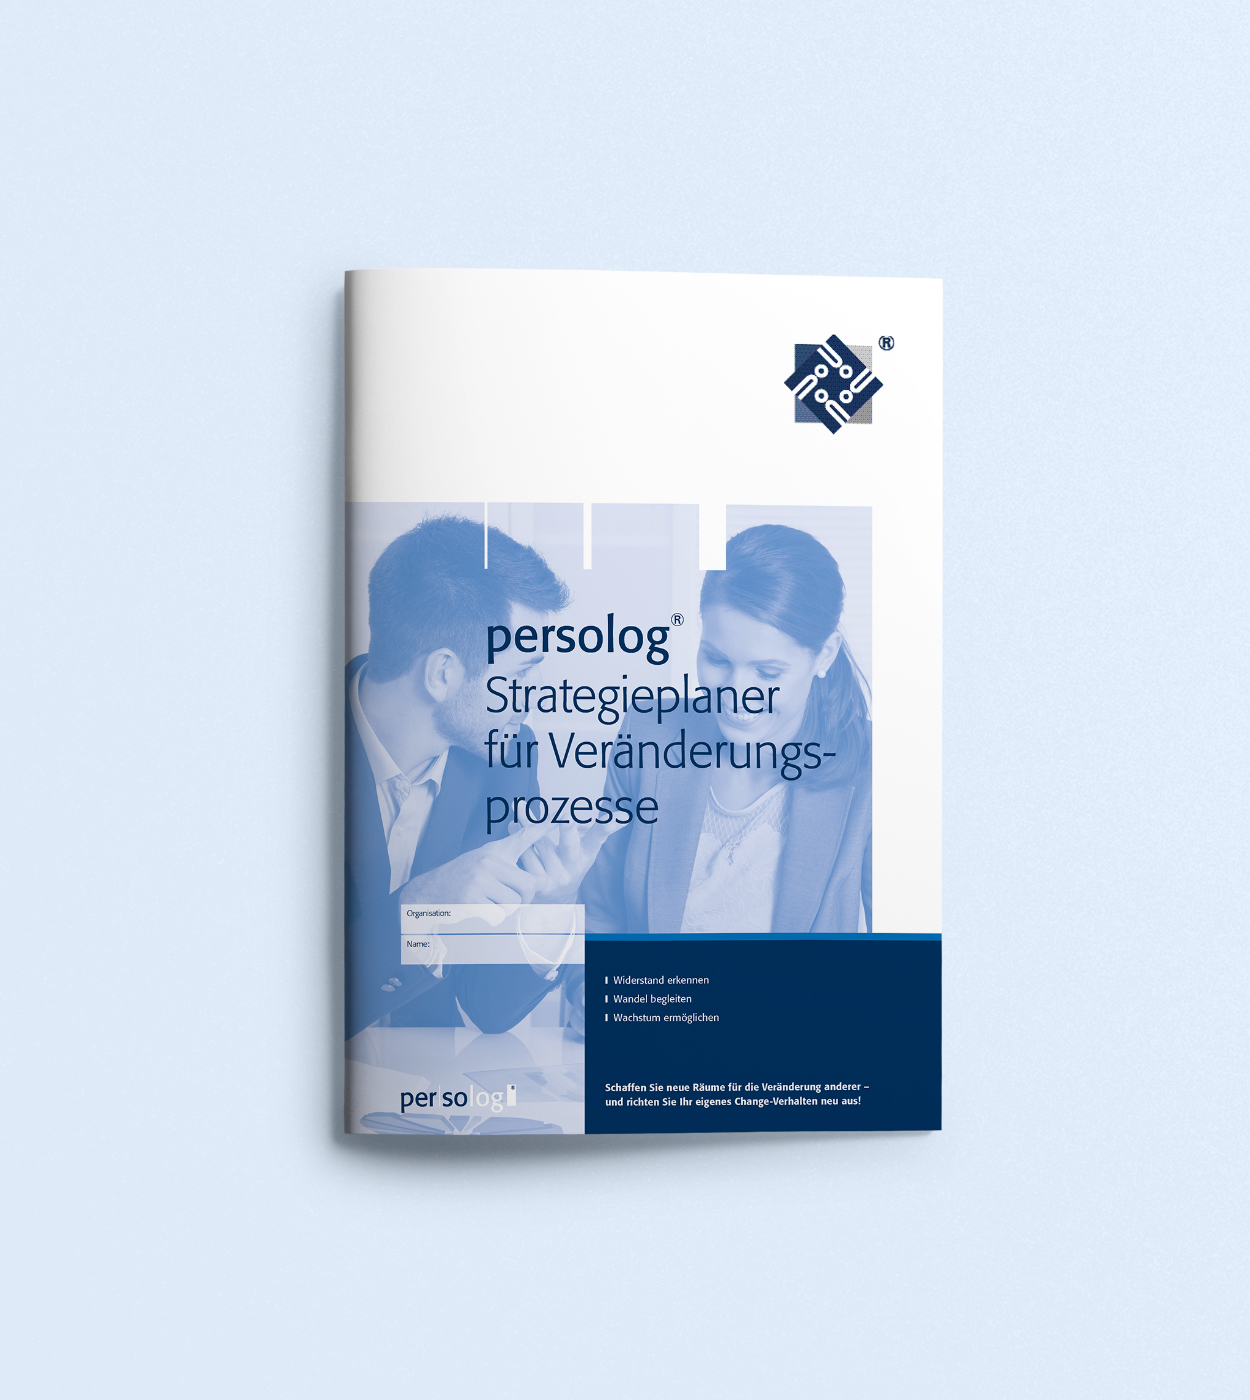 persolog® Strategy Planner for Change Management